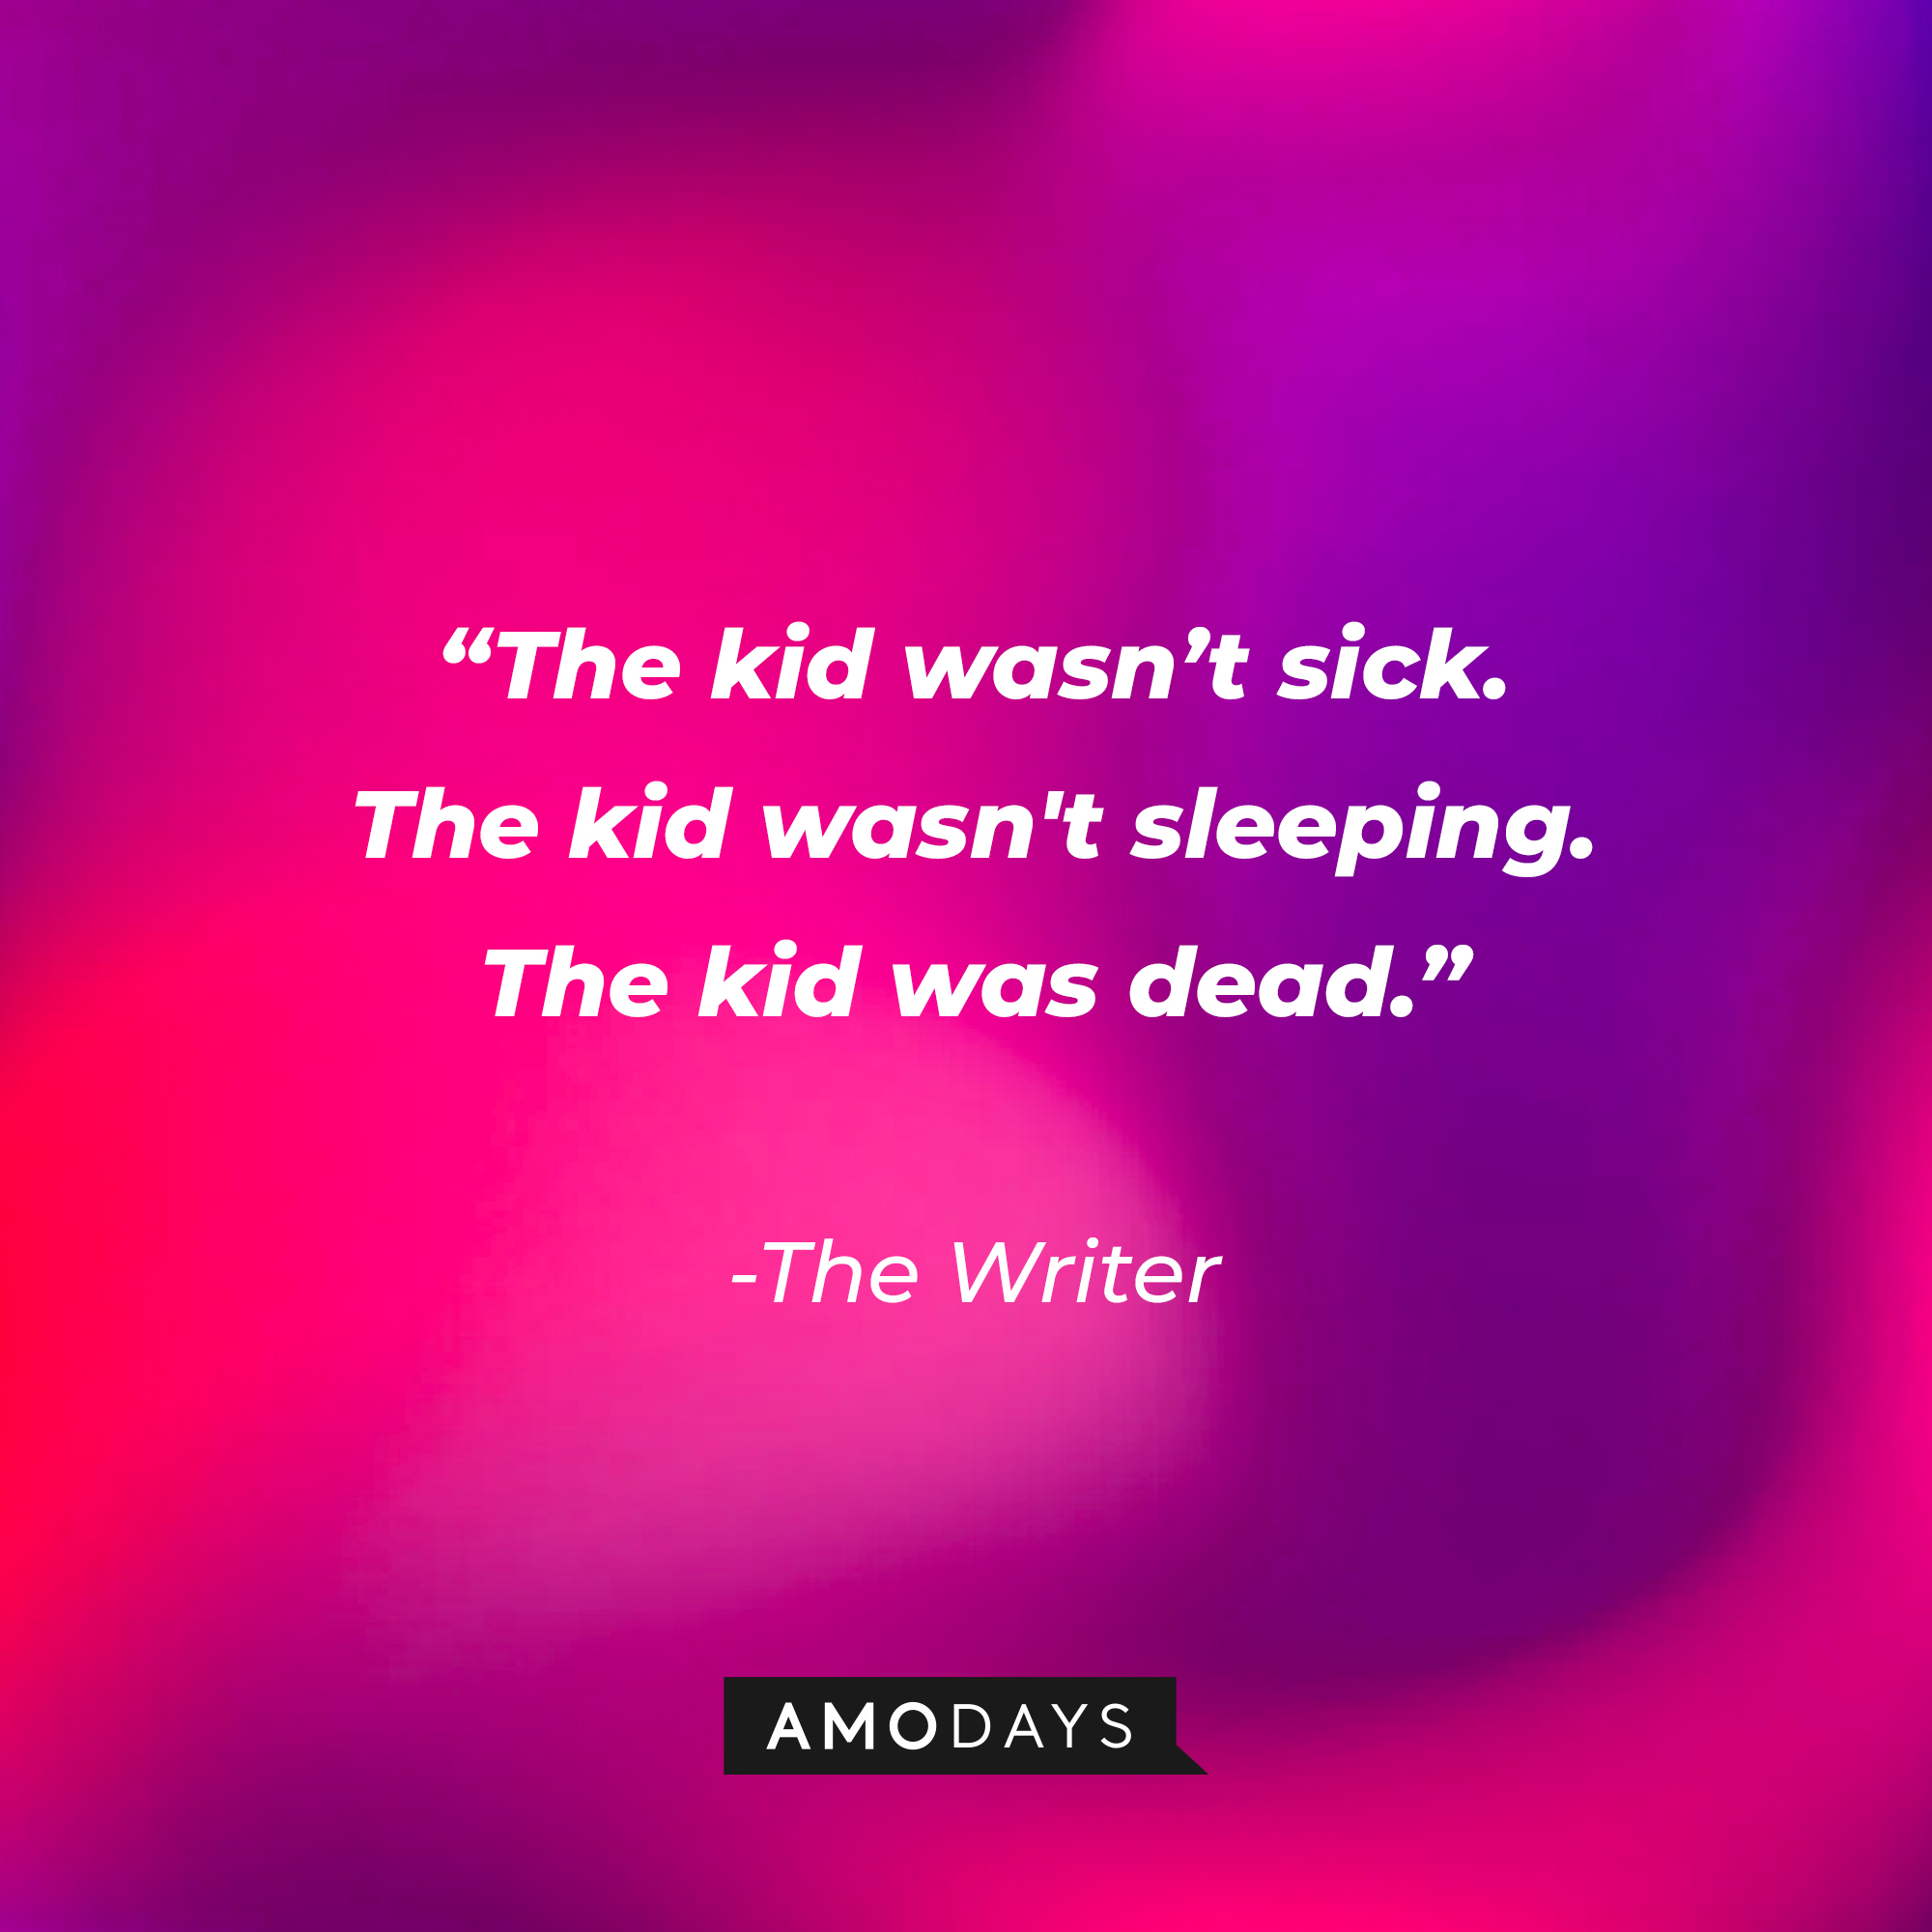 The Writer’s quote: "The kid wasn’t sick. The kid wasn’t sleeping. The kid was dead." | Source: AmoDays